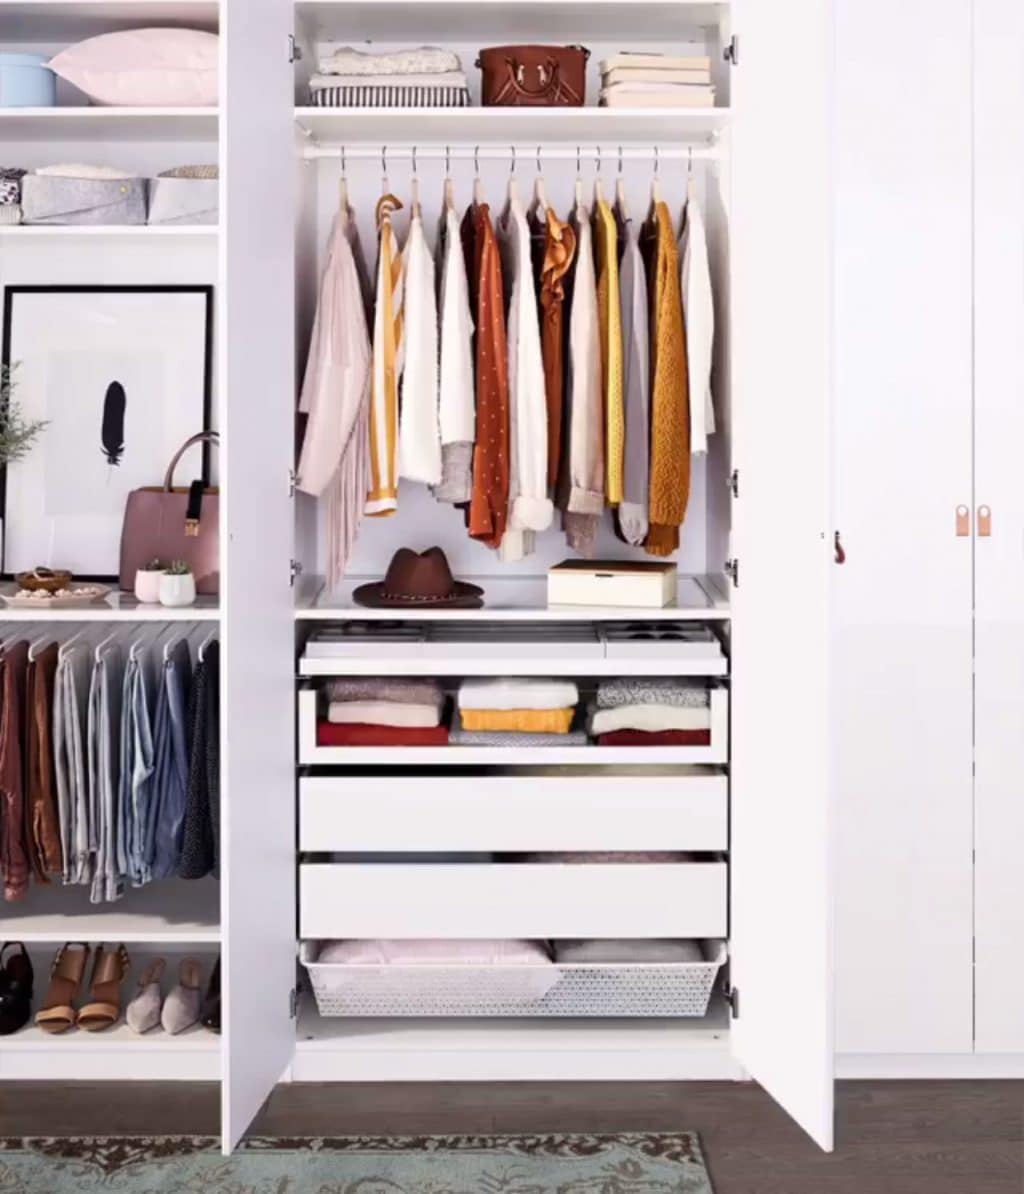 Costume Ikea Closet Examples for Small Bedroom